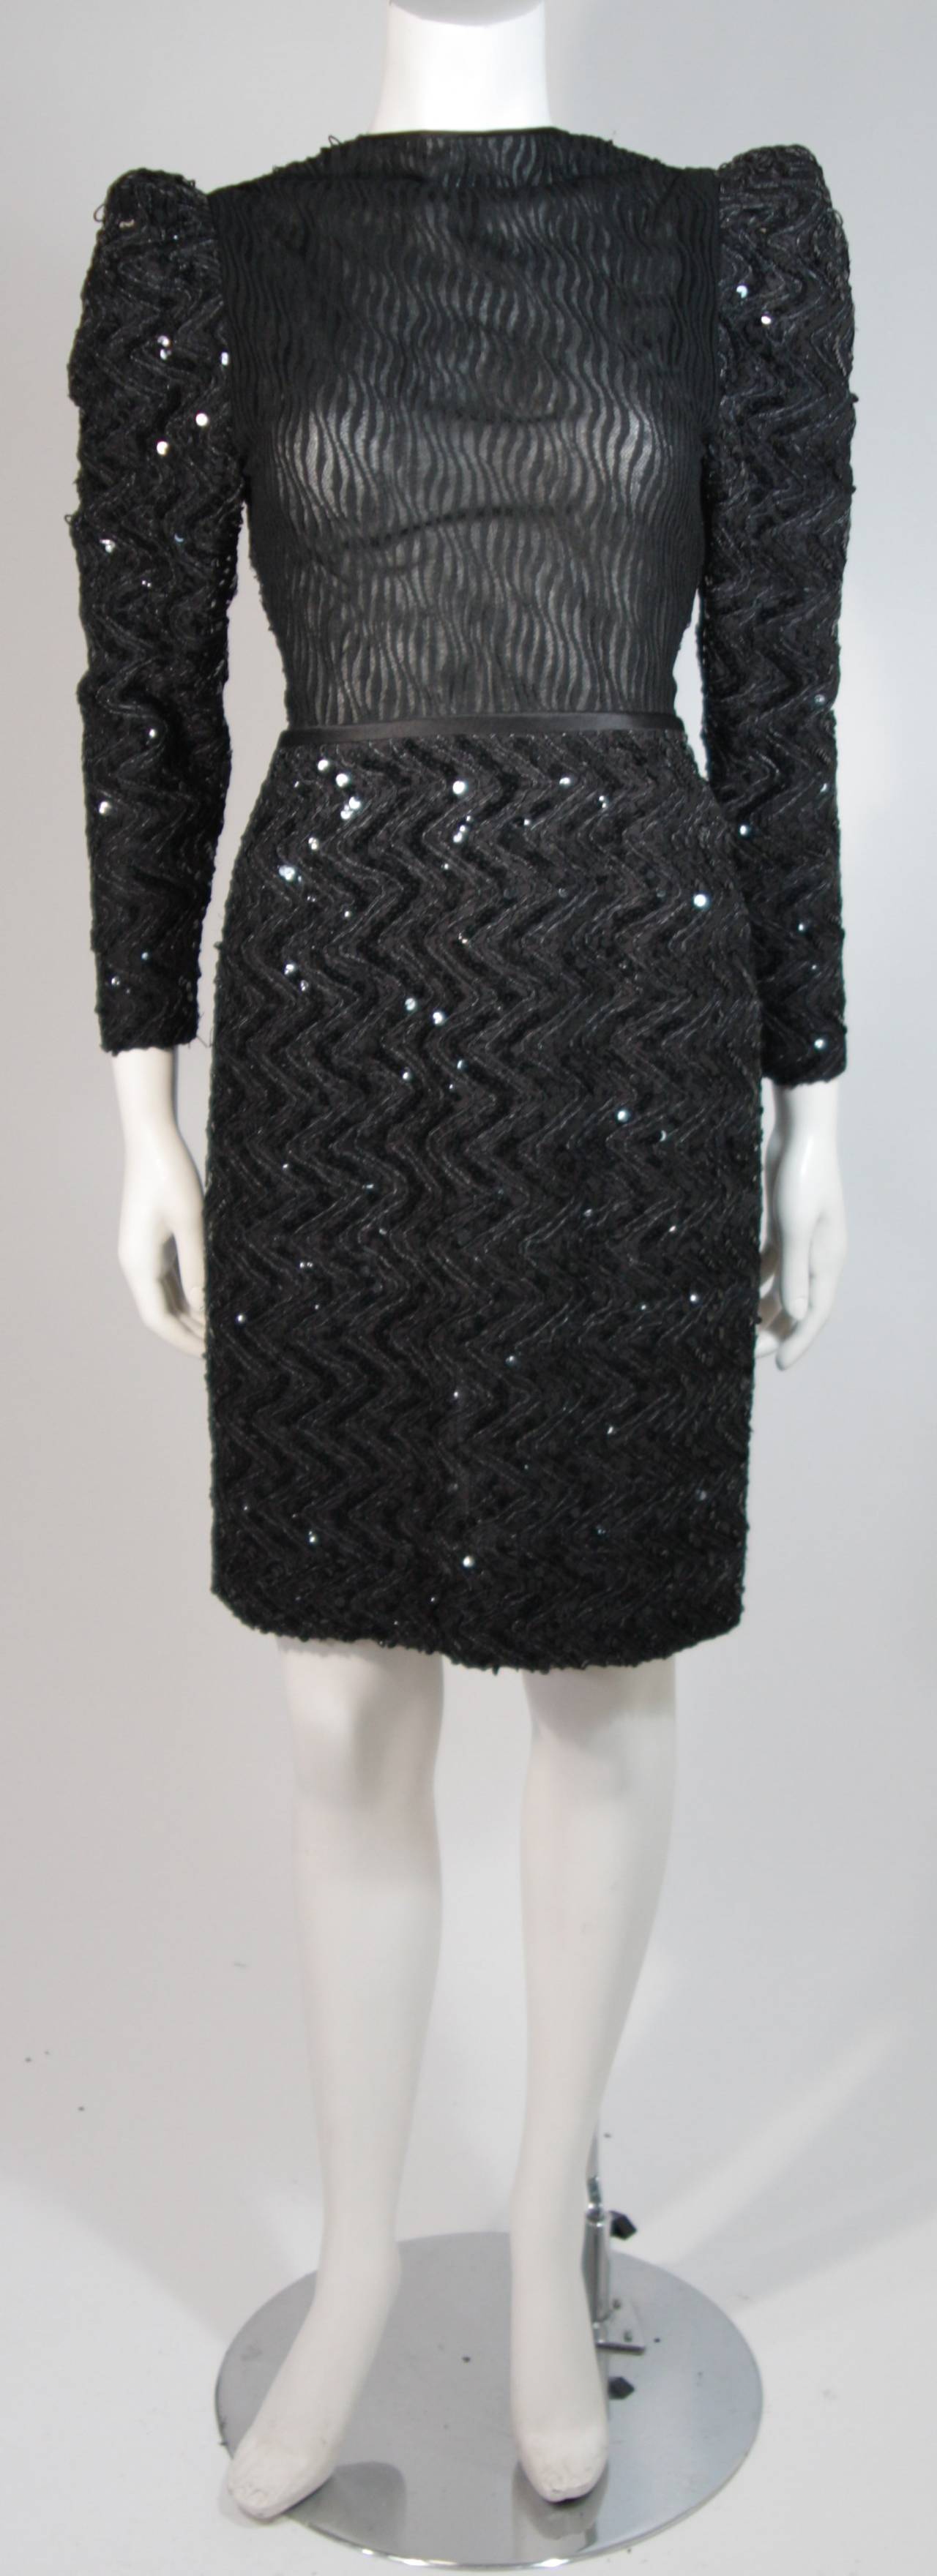 This Vicky Tiel cocktail dress is composed of a black sequin lace and features a sheer bodice. There are gathers at the shoulders for a dramatic effect. There is a center back zipper closure for ease of access. In excellent condition. Made in